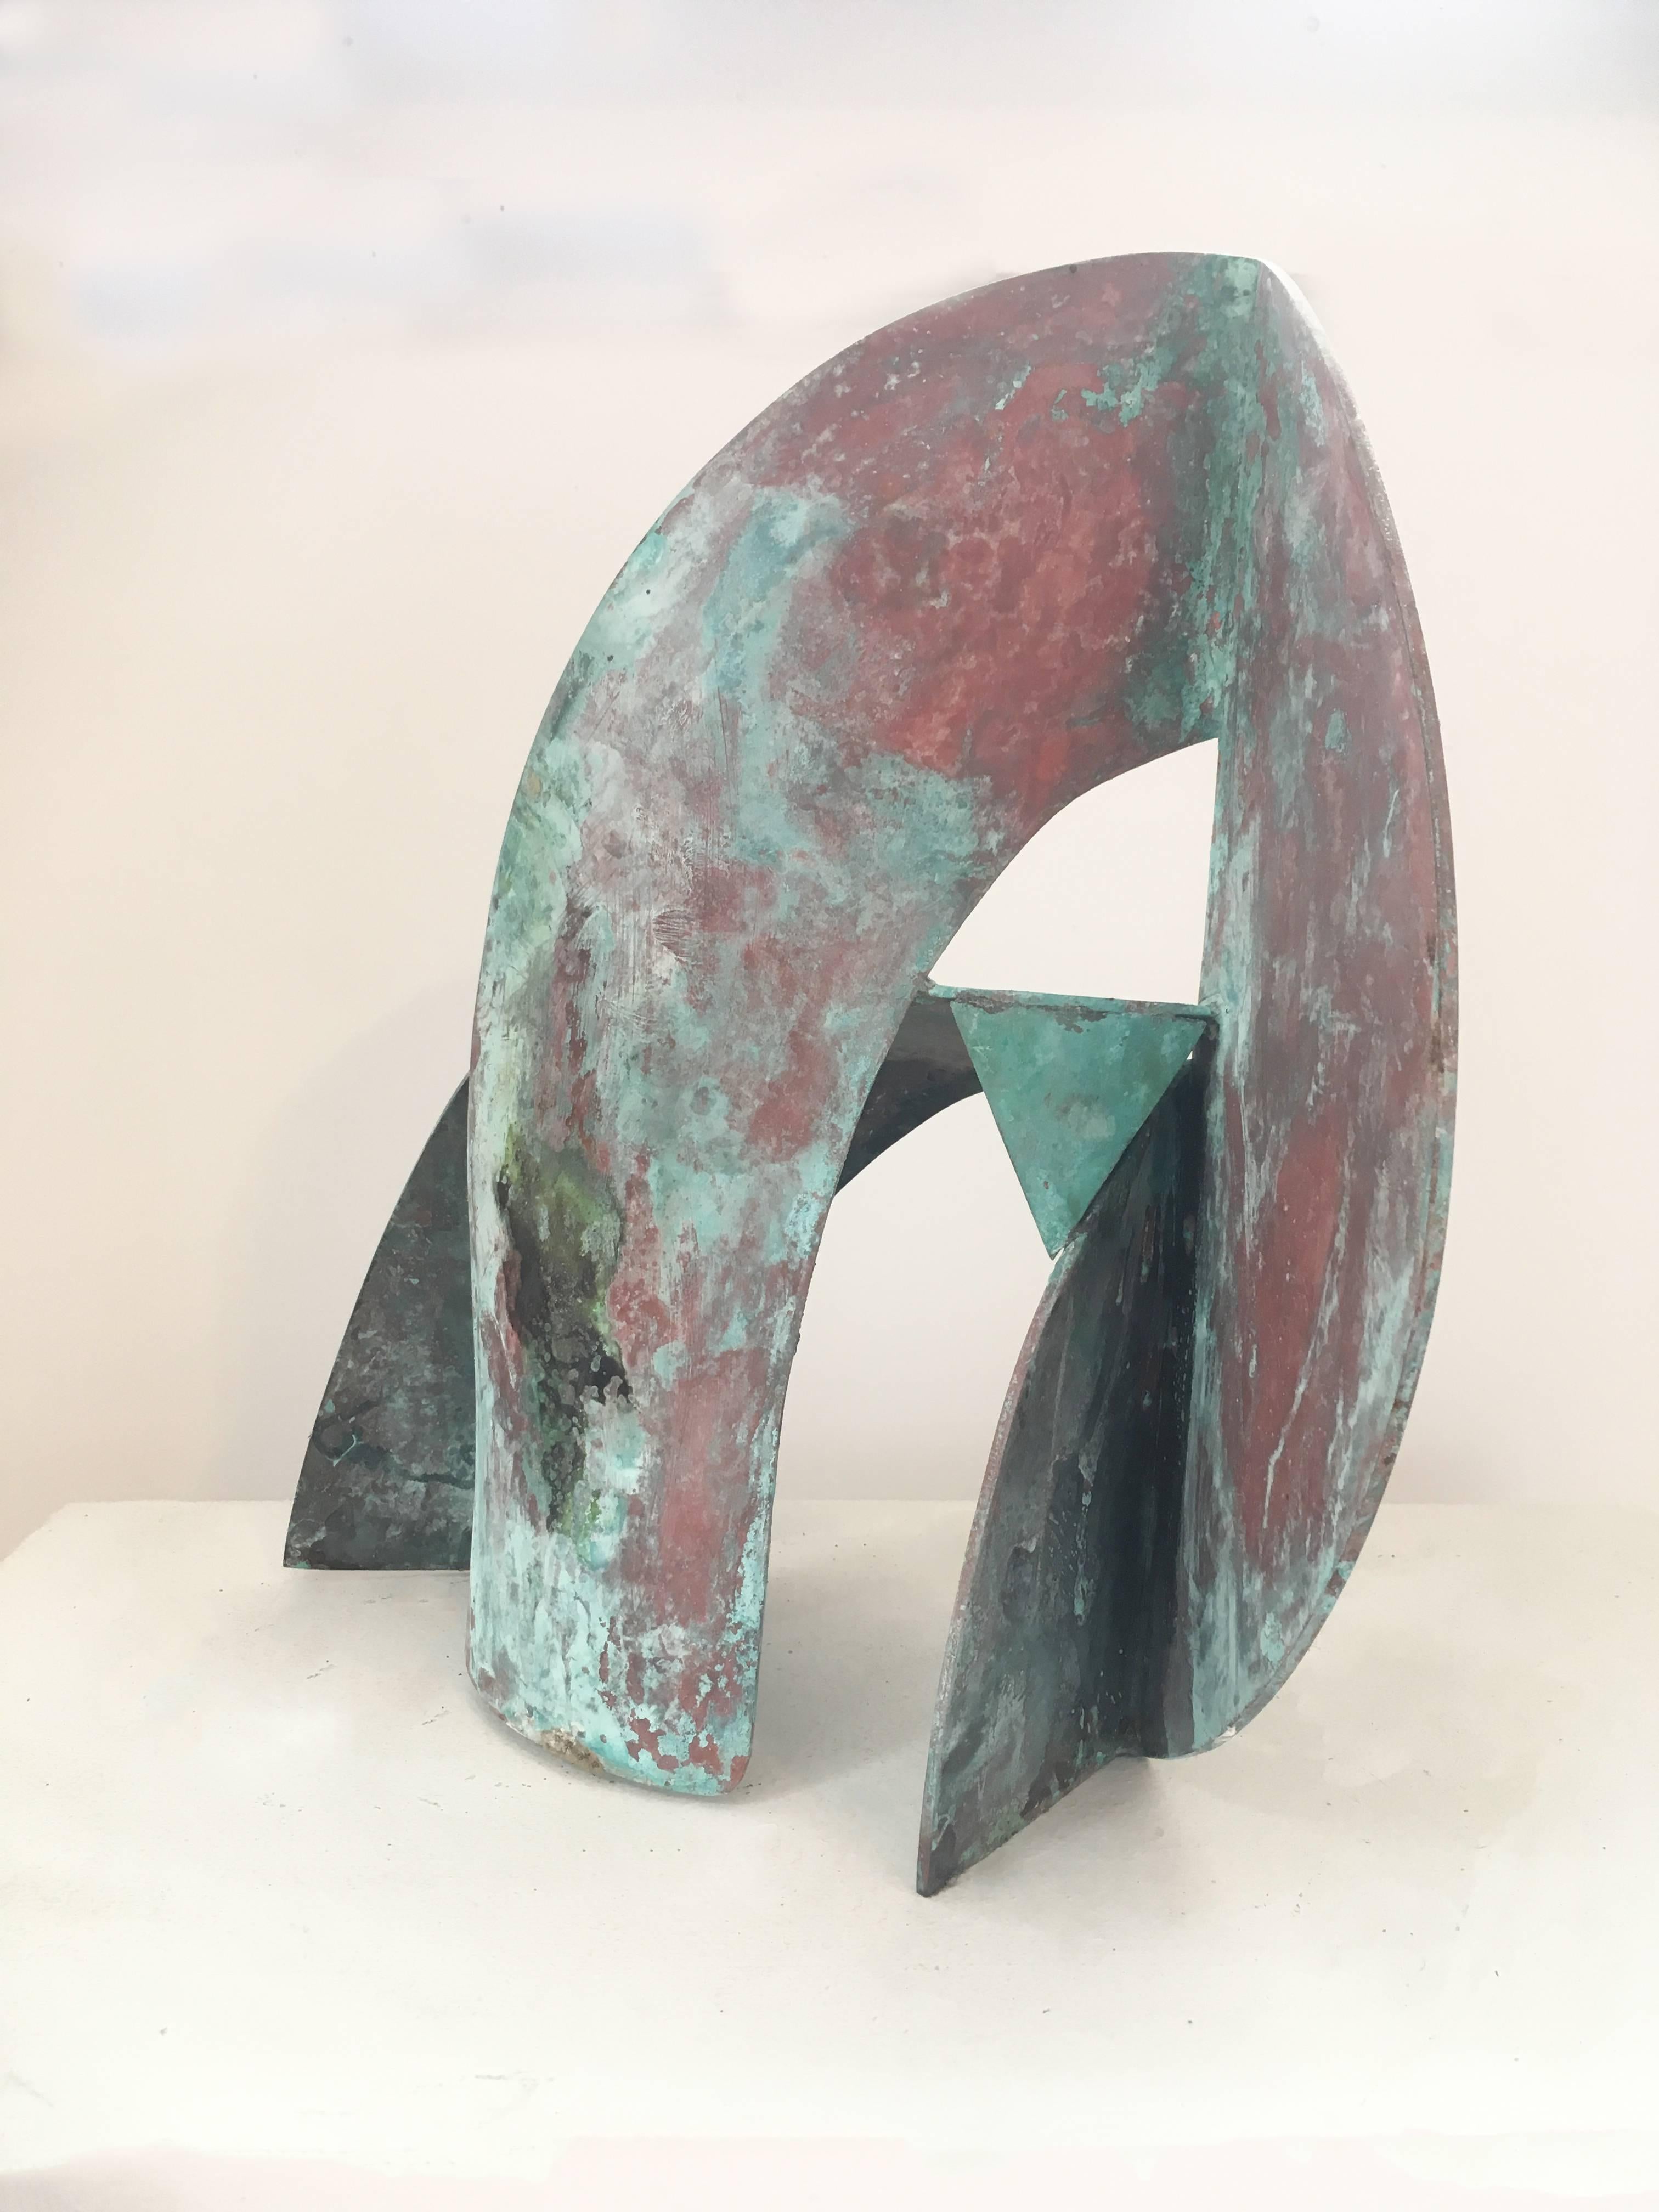 Small abstract sculpture in teal patinated brass, mid century modern style 
13 x 12 x 7 inches
patinated brass 

This small, contemporary abstract sculpture made of patinated brass is perfectly suited for a tabletop, pedestal, or mantle piece.